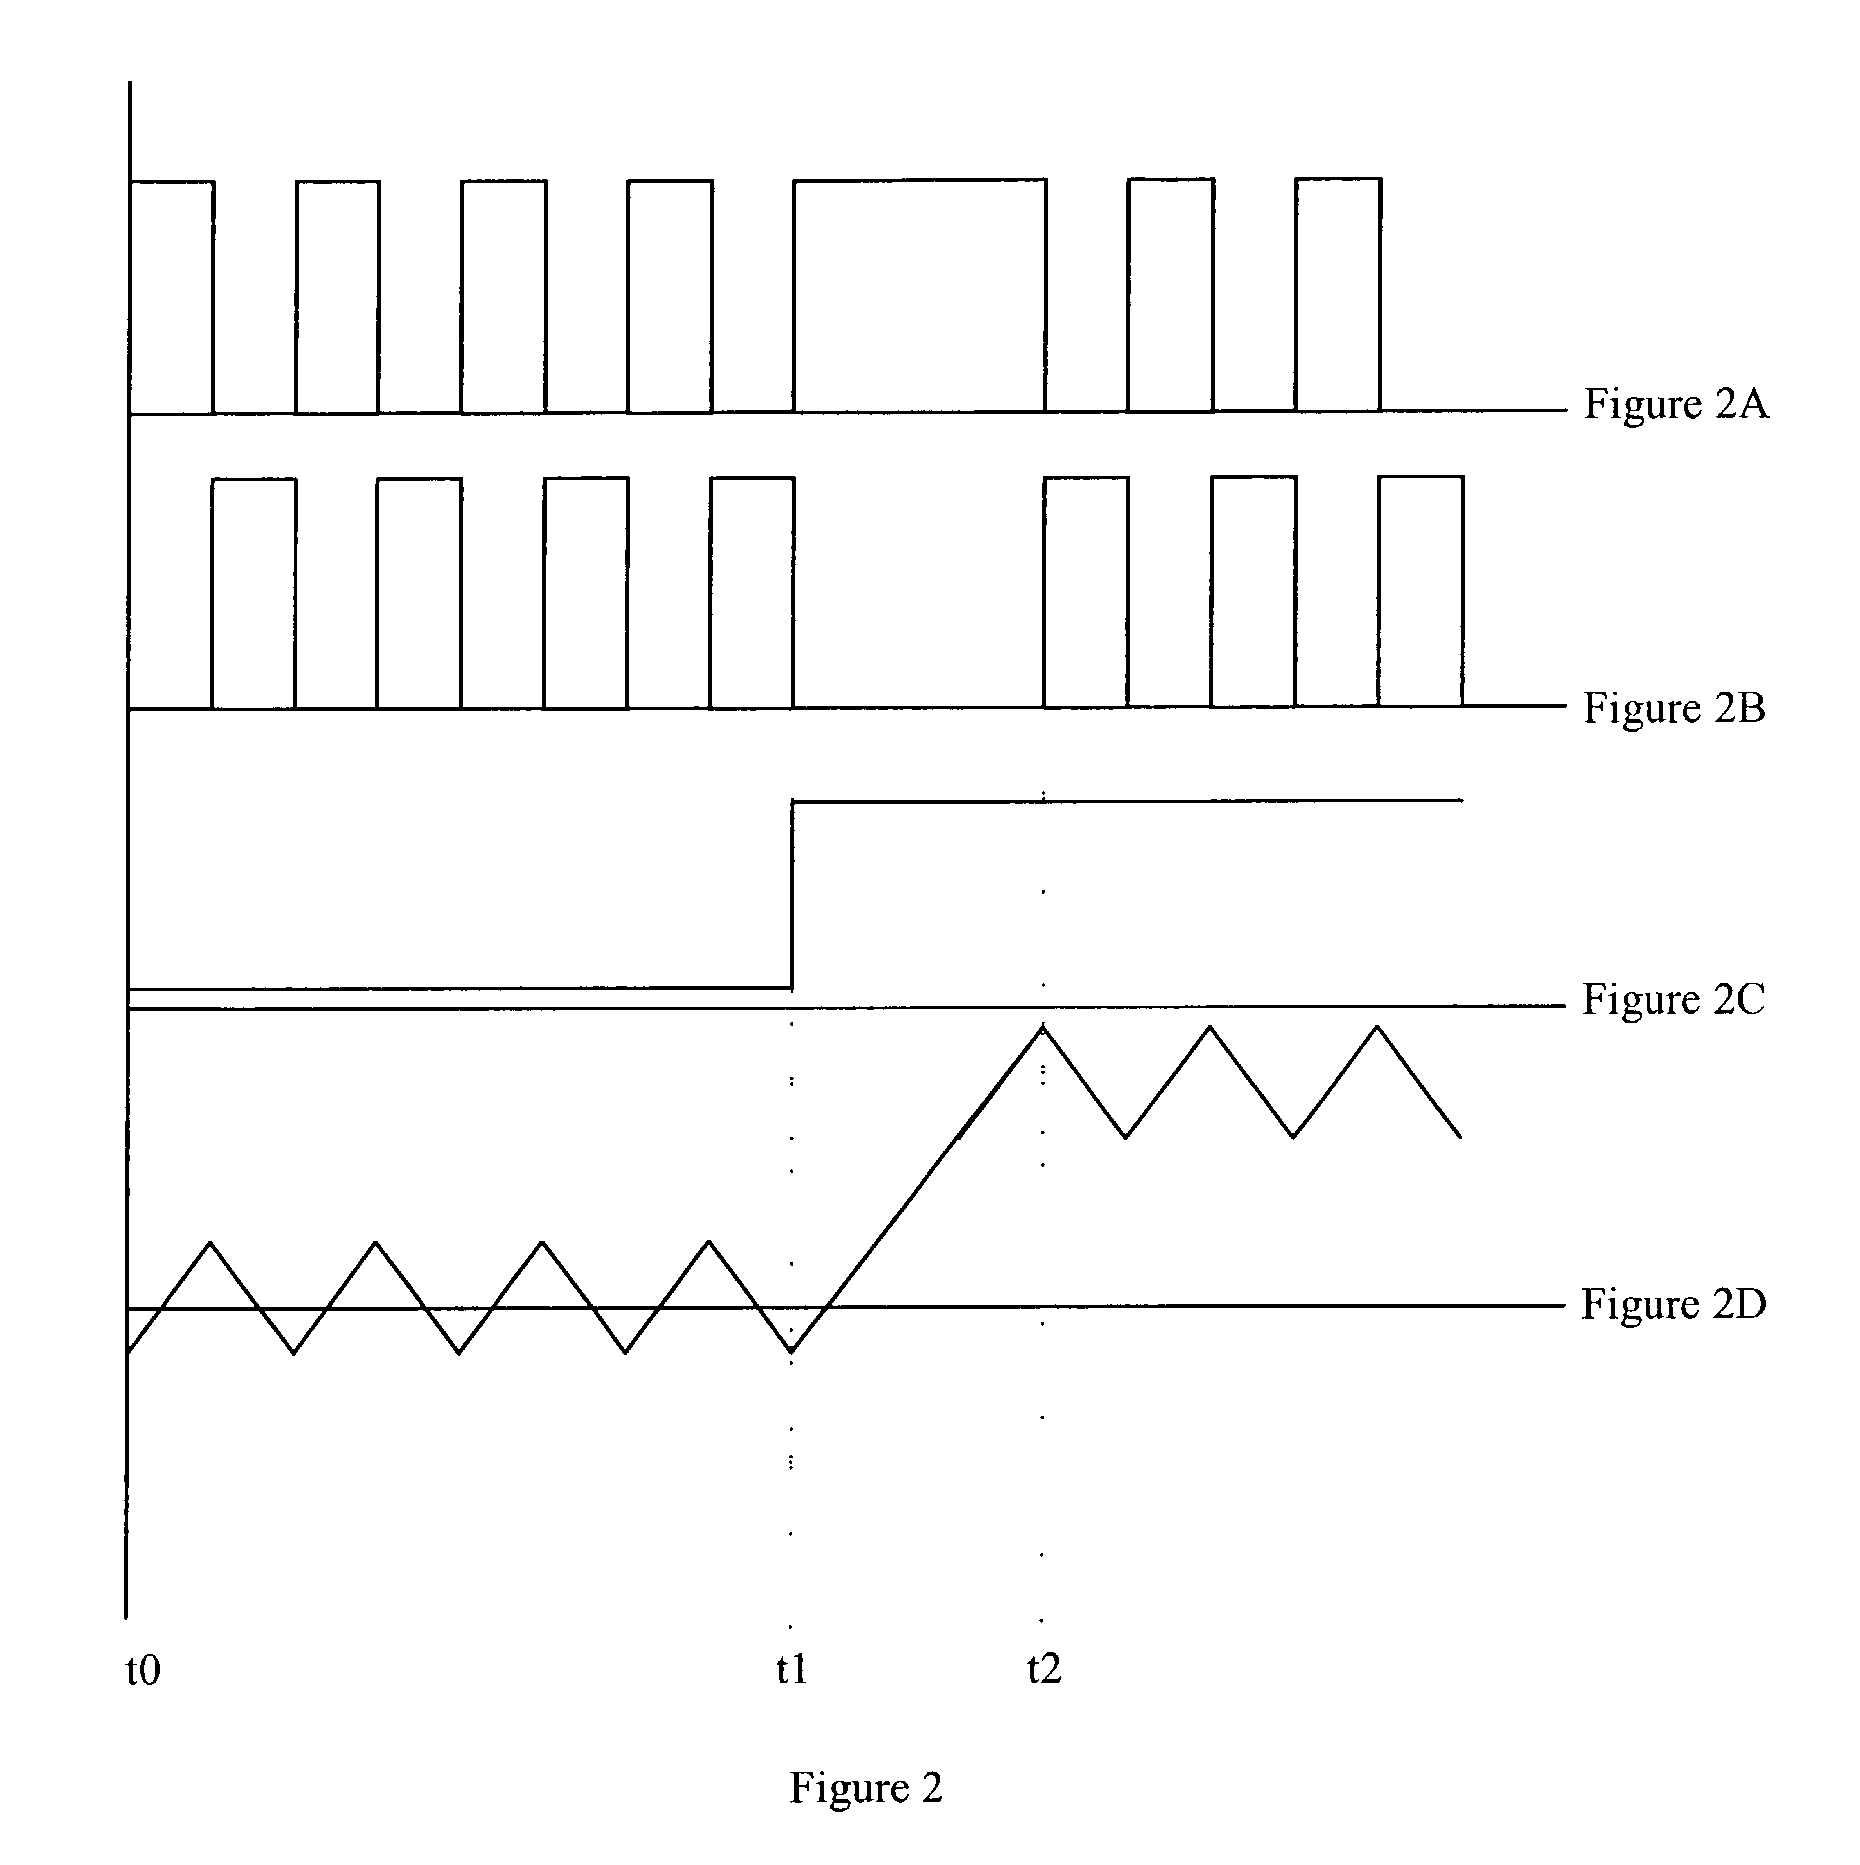 Stepping inductor for fast transient response of switching converter